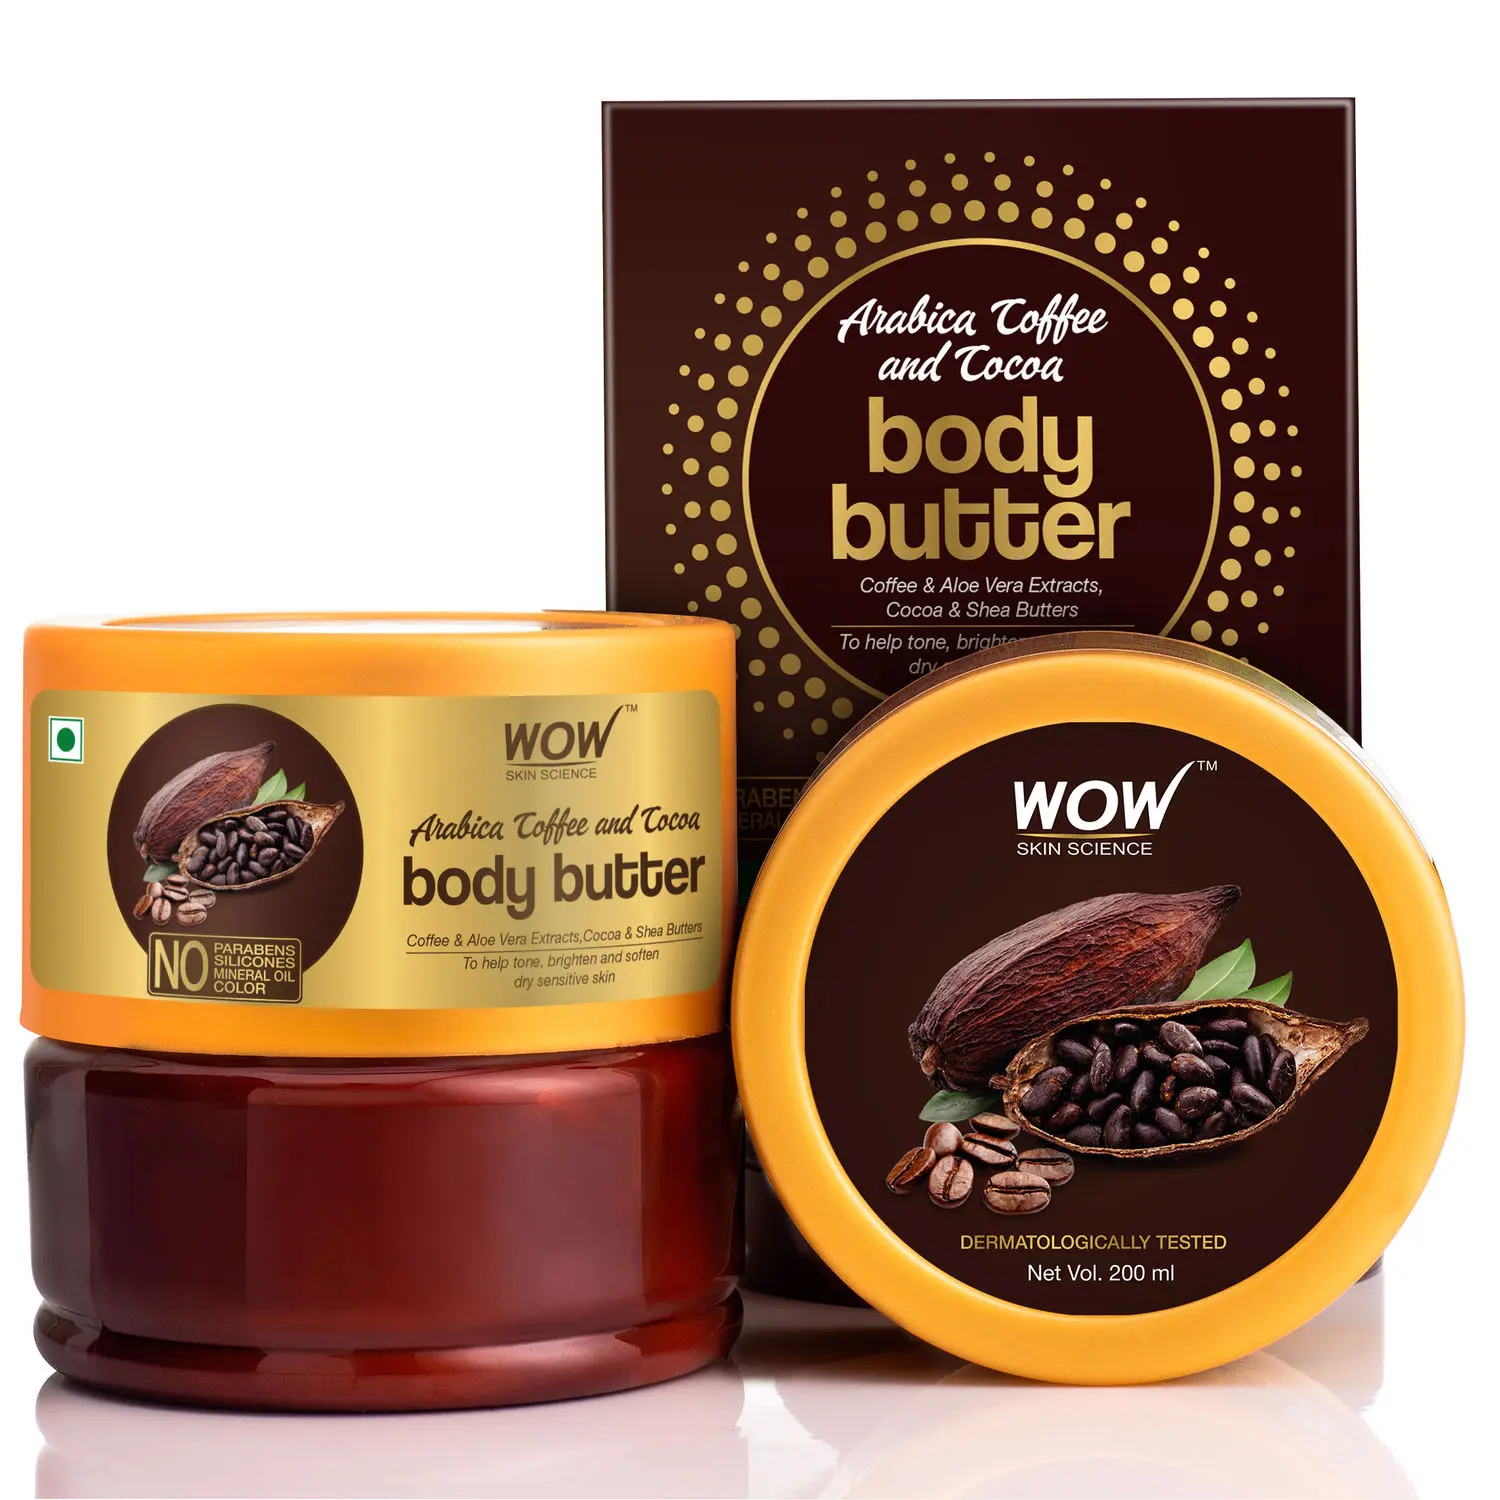 WOW Skin Science Arabica Coffee And Cocoa Body Butter (200 ml)